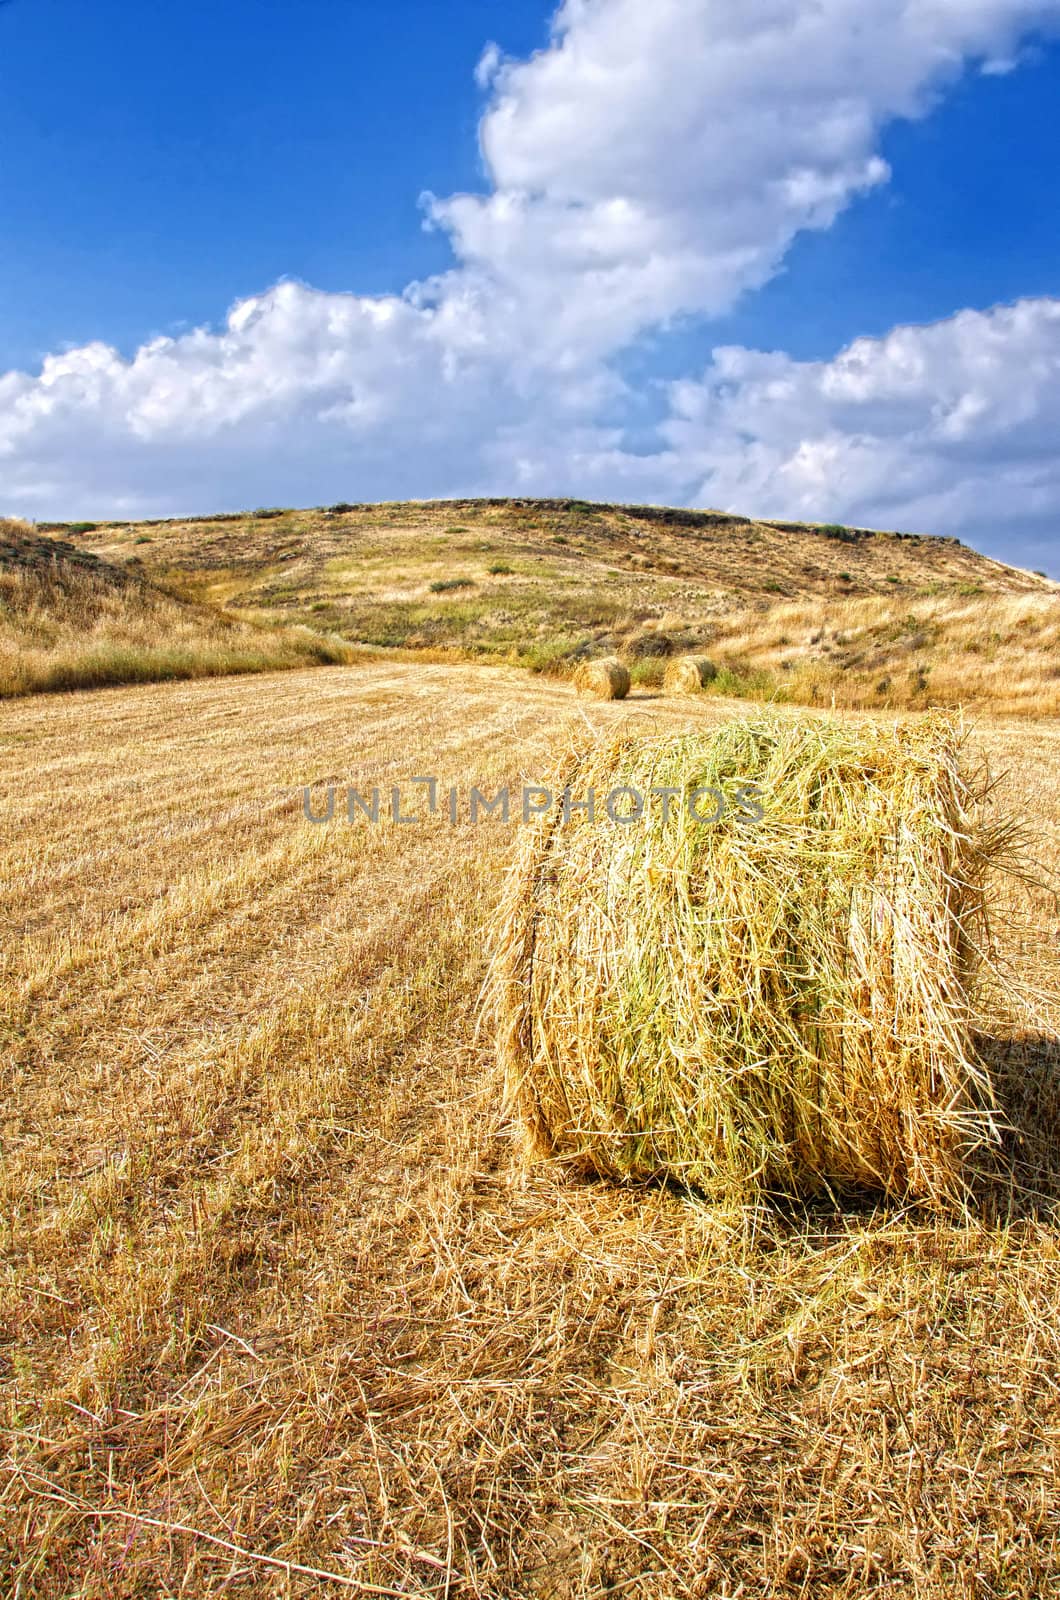 Hay roll in golden dry field on a sunny day